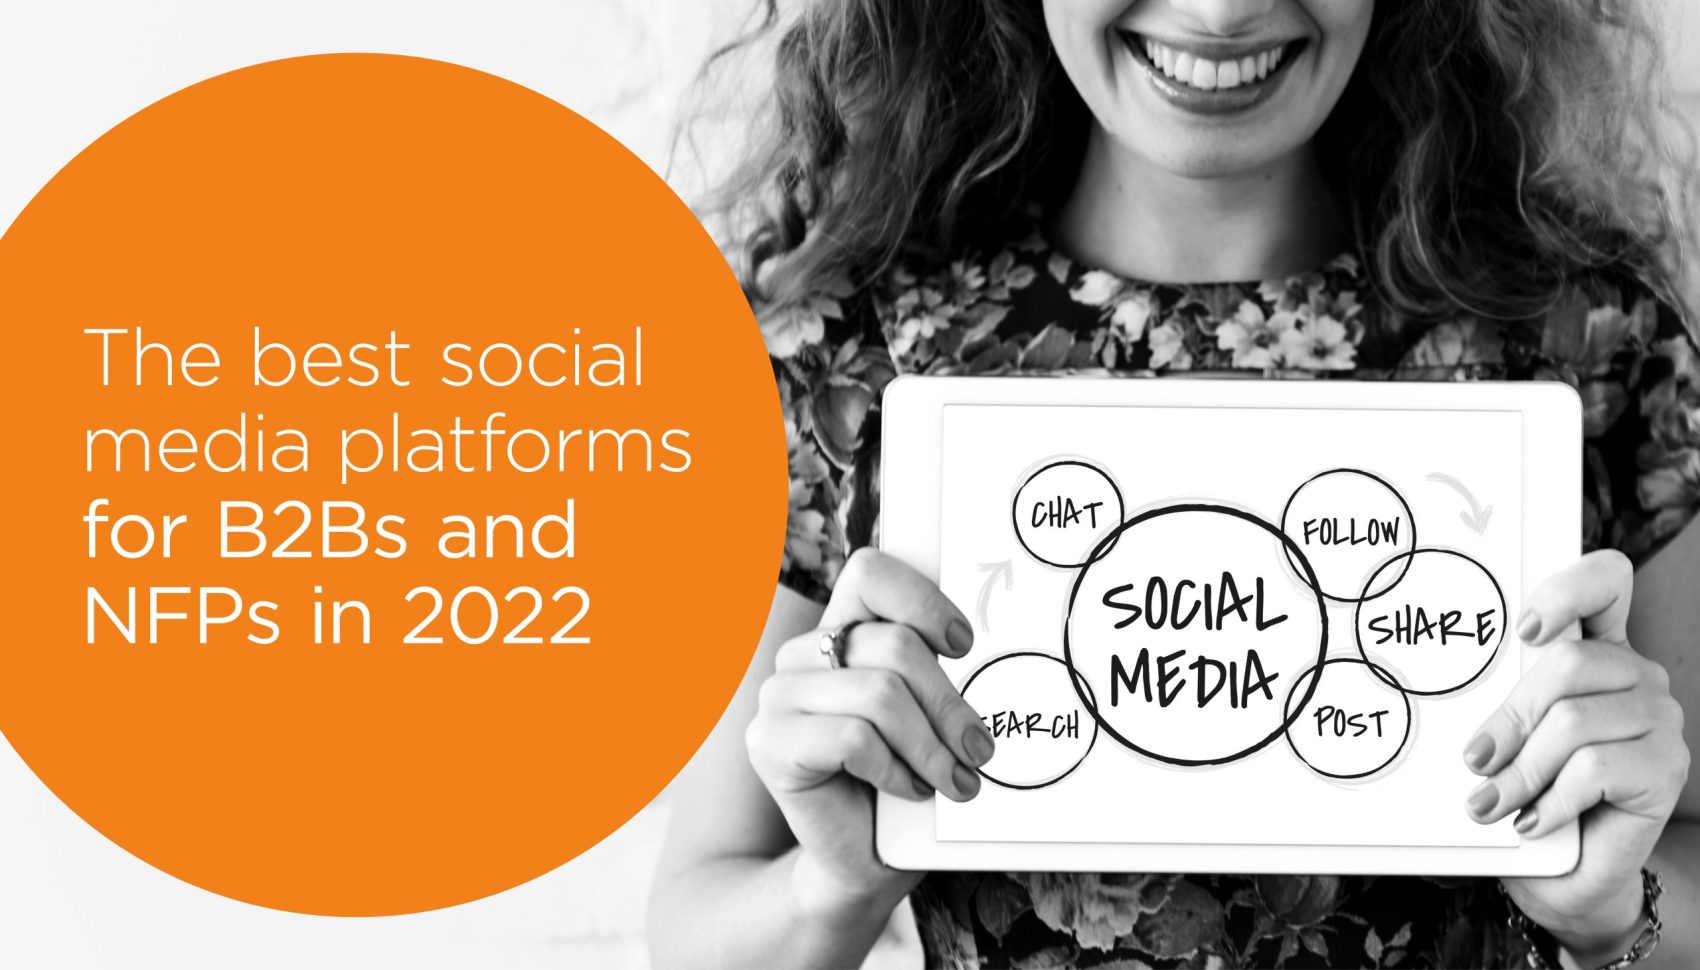 The Best Social Media Platforms for B2Bs and NFPs in 2022